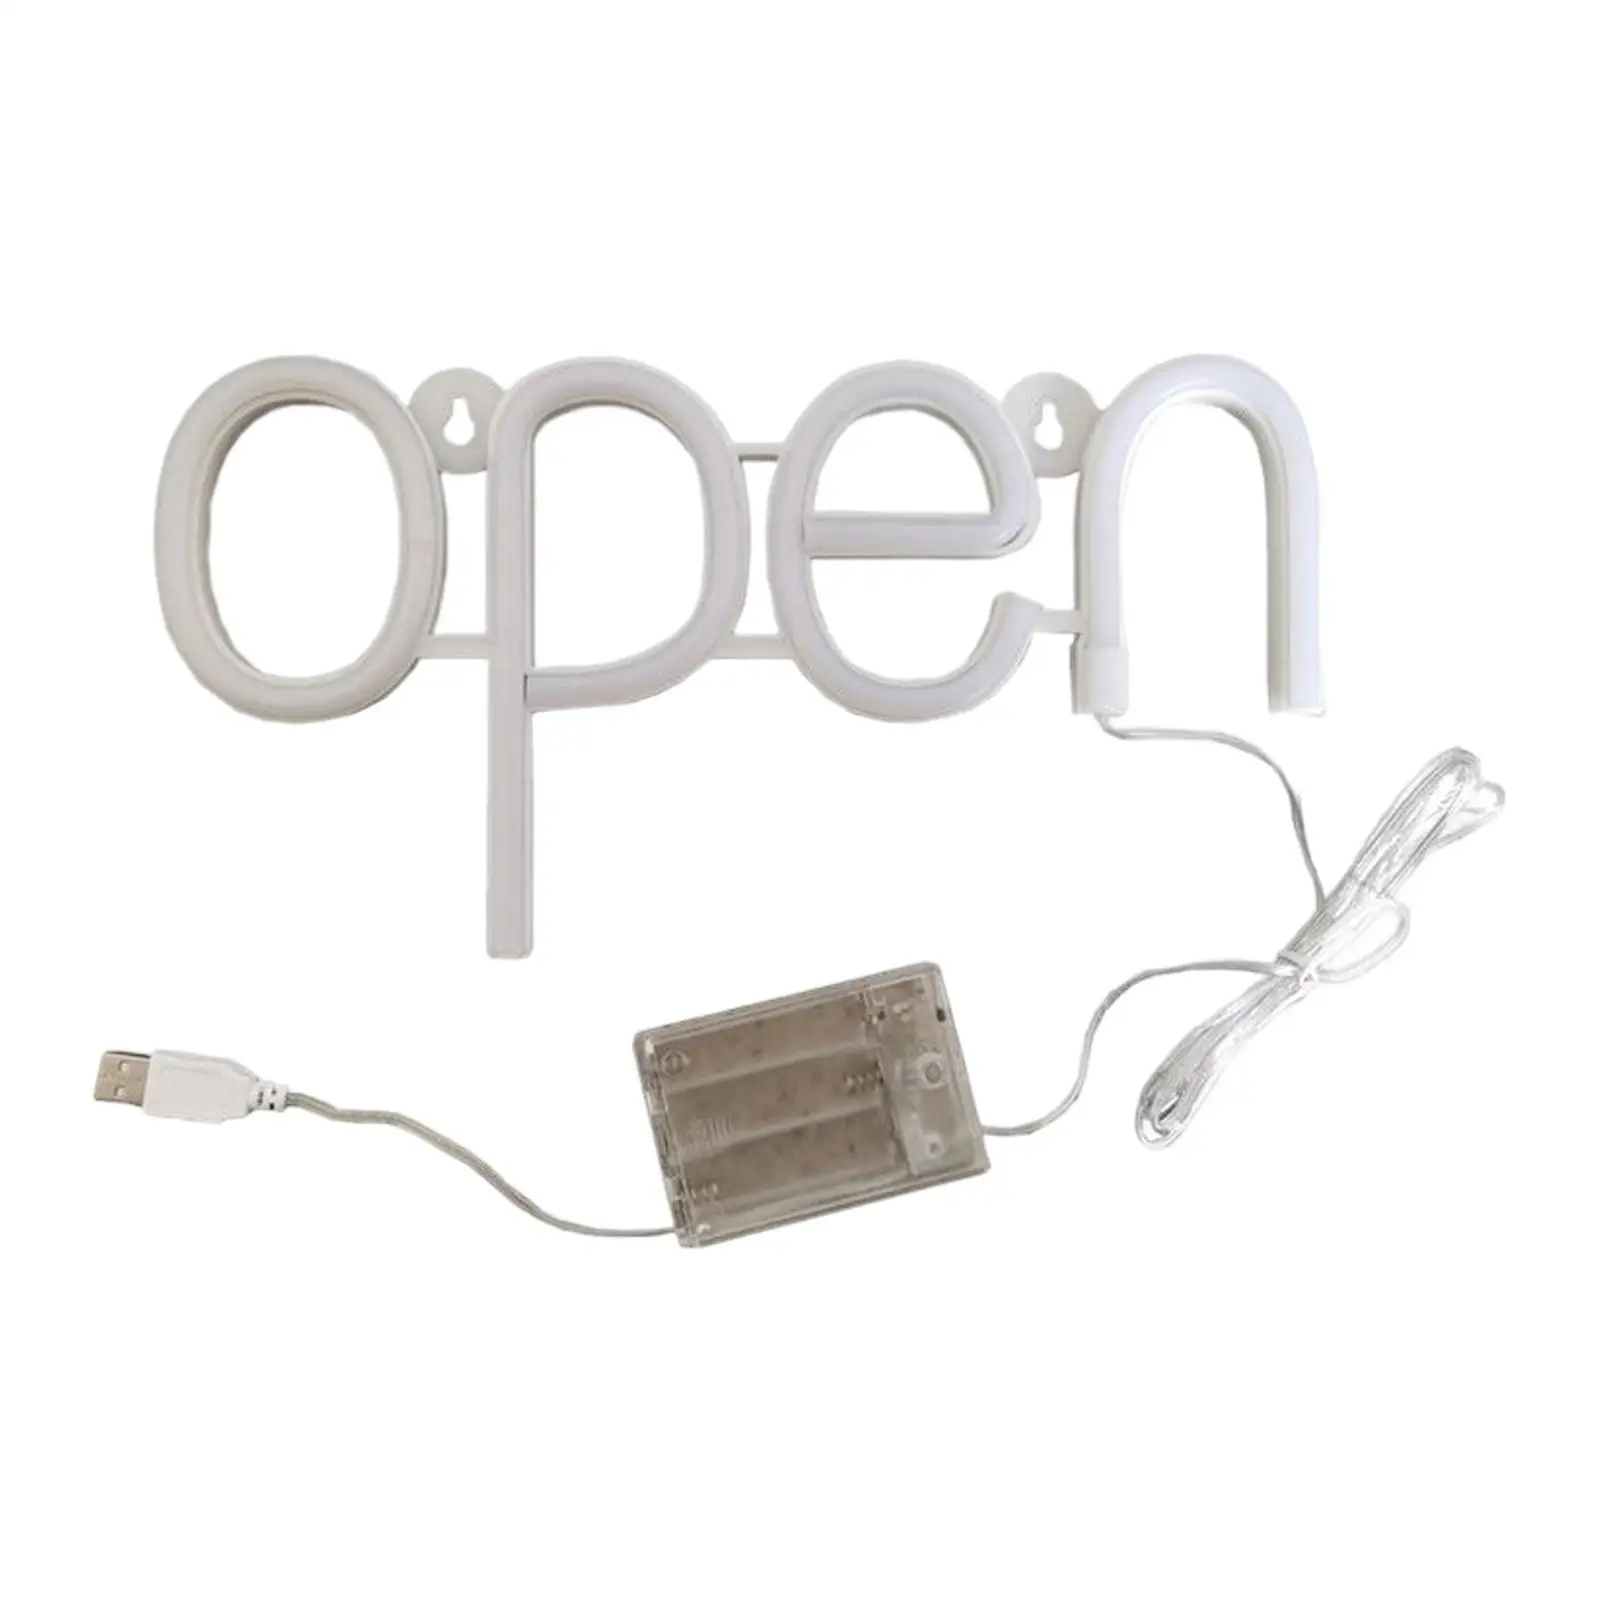 LED Open Sign Lighting Light Neon Lights Store Window Cafe Outdoor Lamp Club